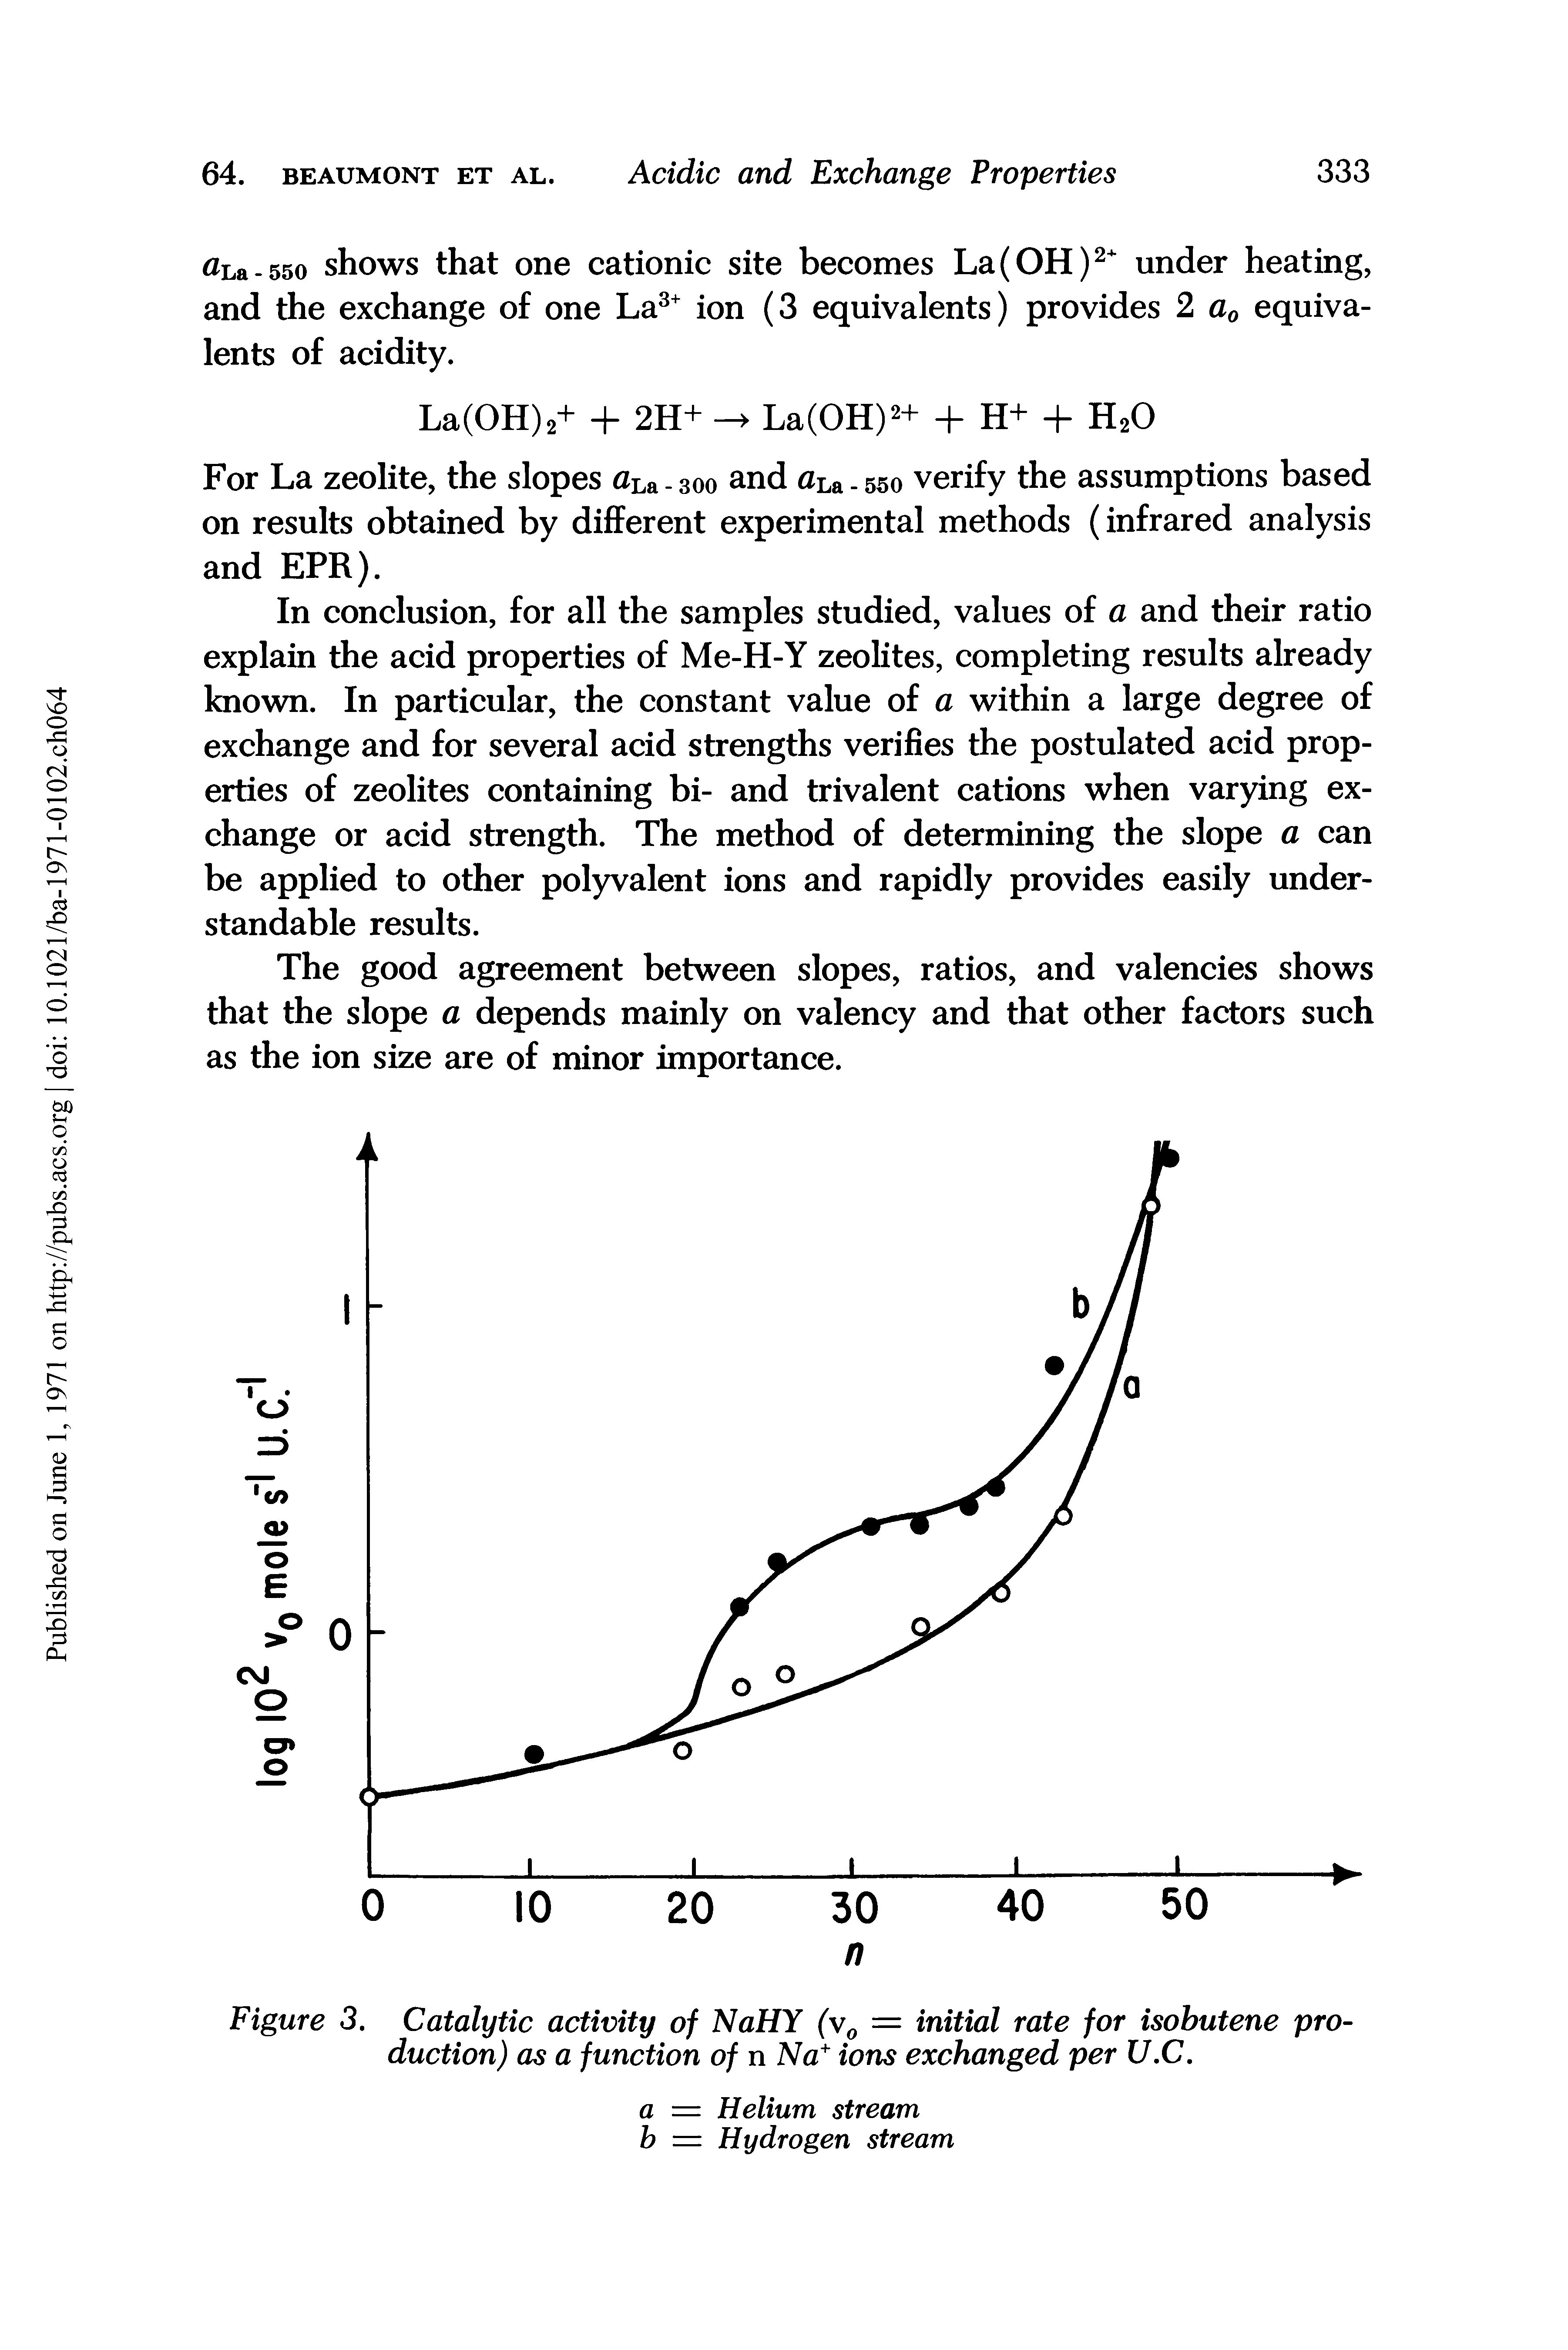 Figure 3. Catalytic activity of NaHY fv = initial rate for isobutene production) as a function of n Na " ions exchanged per U.C.